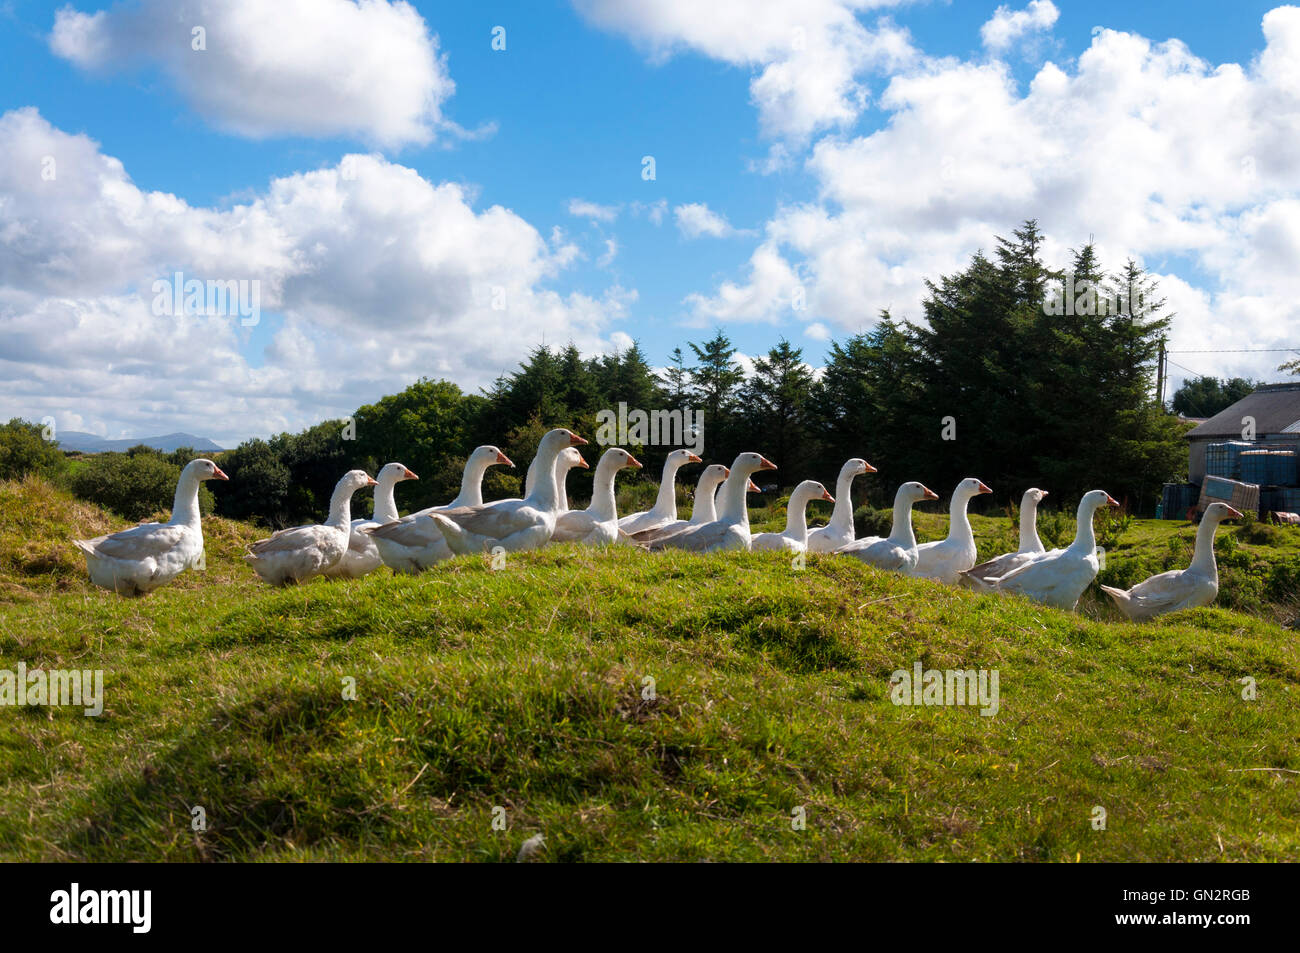 Ardara, County Donegal, Ireland weather. 28th August 2016. A flock of geese in the sunshine on Ireland's 'Wild Atlantic Way' on a farm near this west coast village. Photo by:Richard Wayman Credit:  Richard Wayman/Alamy Live News Stock Photo